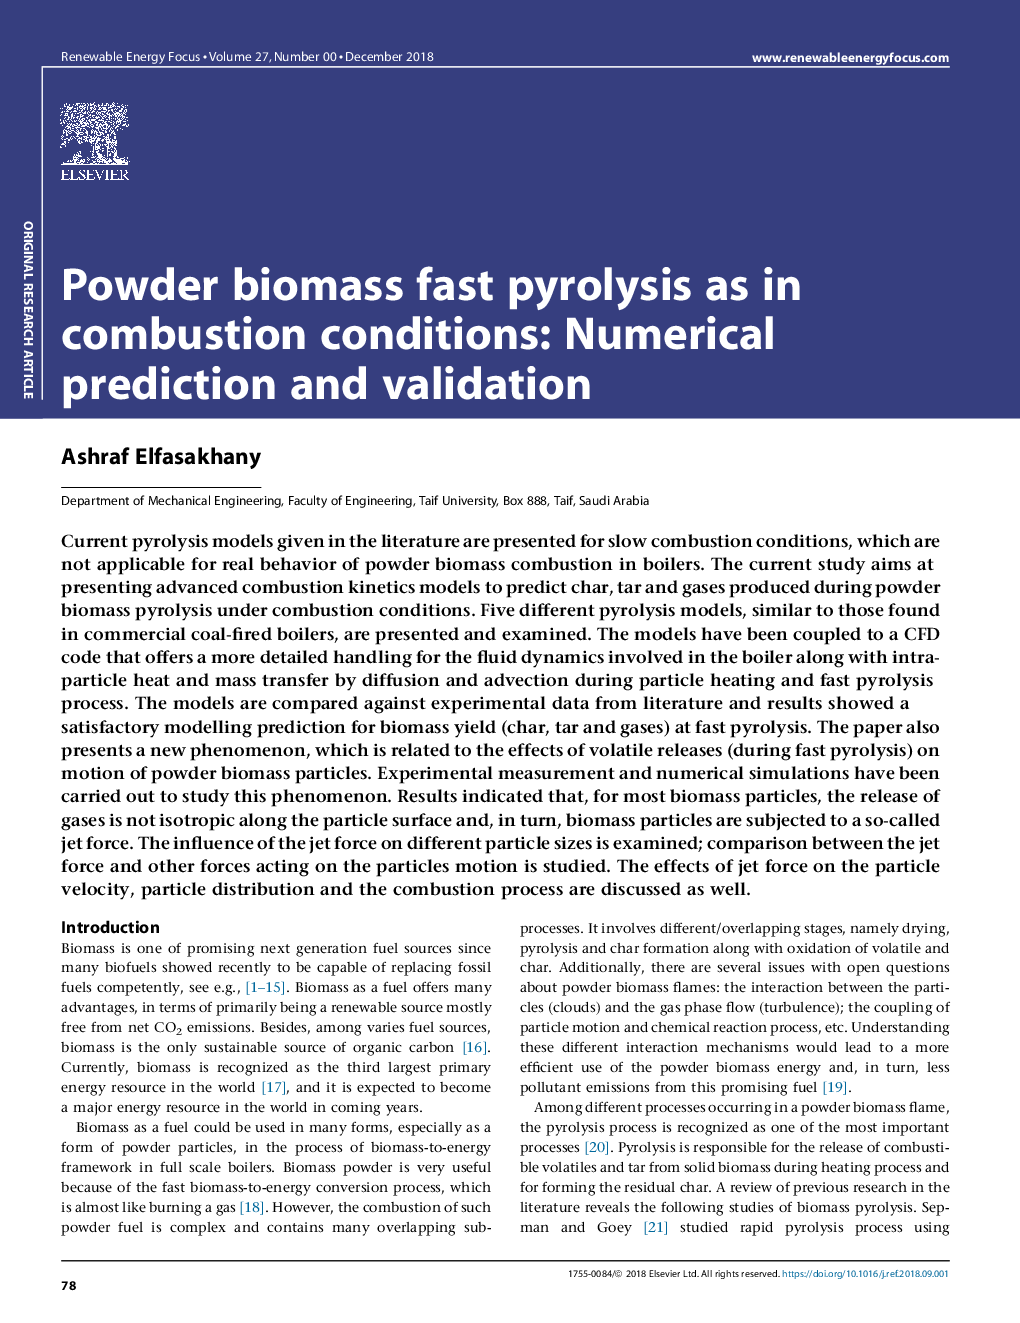 Powder biomass fast pyrolysis as in combustion conditions: Numerical prediction and validation